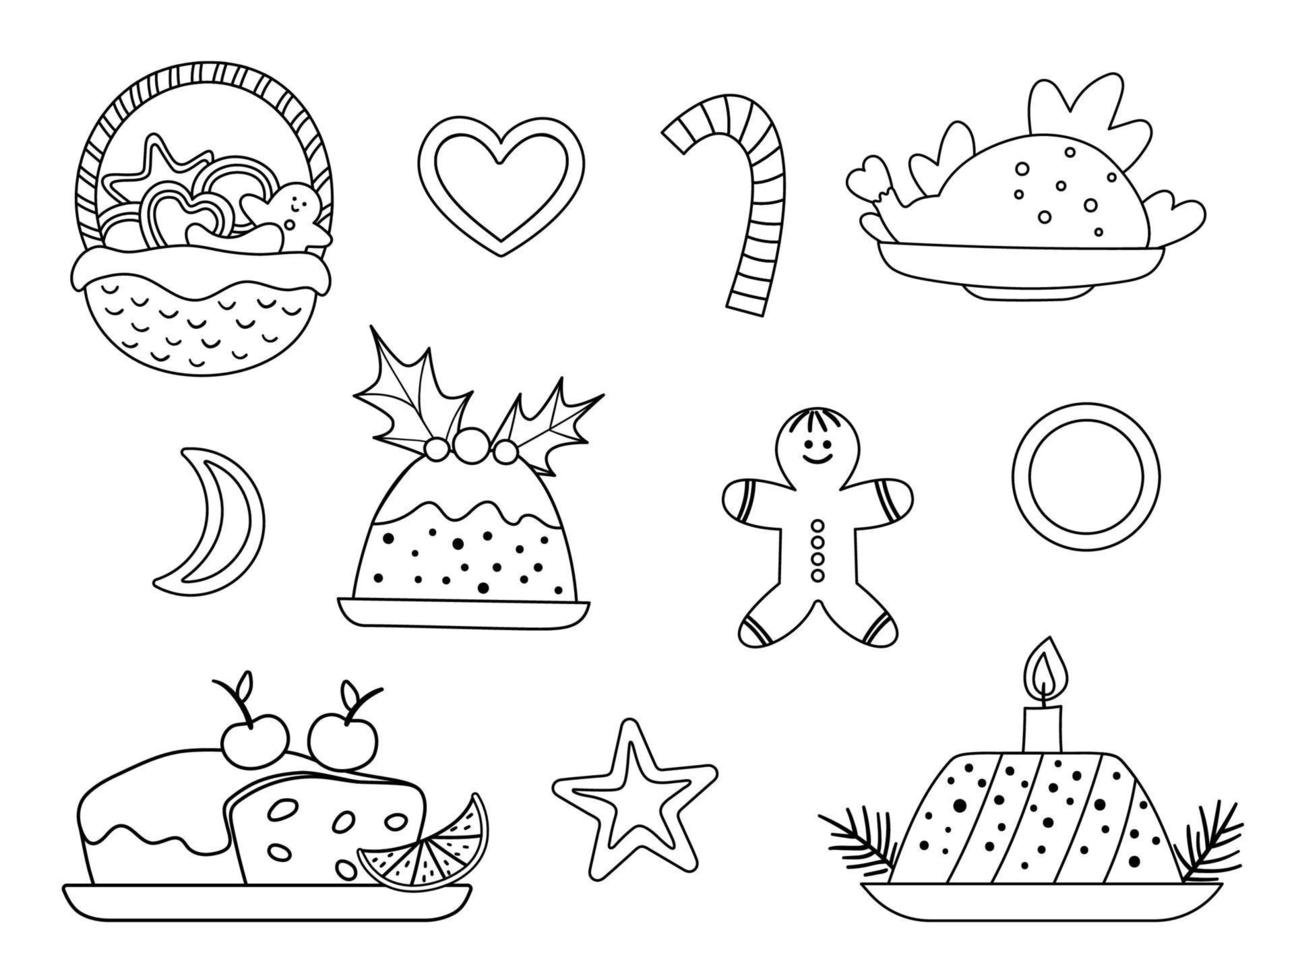 Vector black and white set of traditional Christmas desserts and dishes isolated on white background. Cute funny line illustration of new year meal. Winter food icon collection